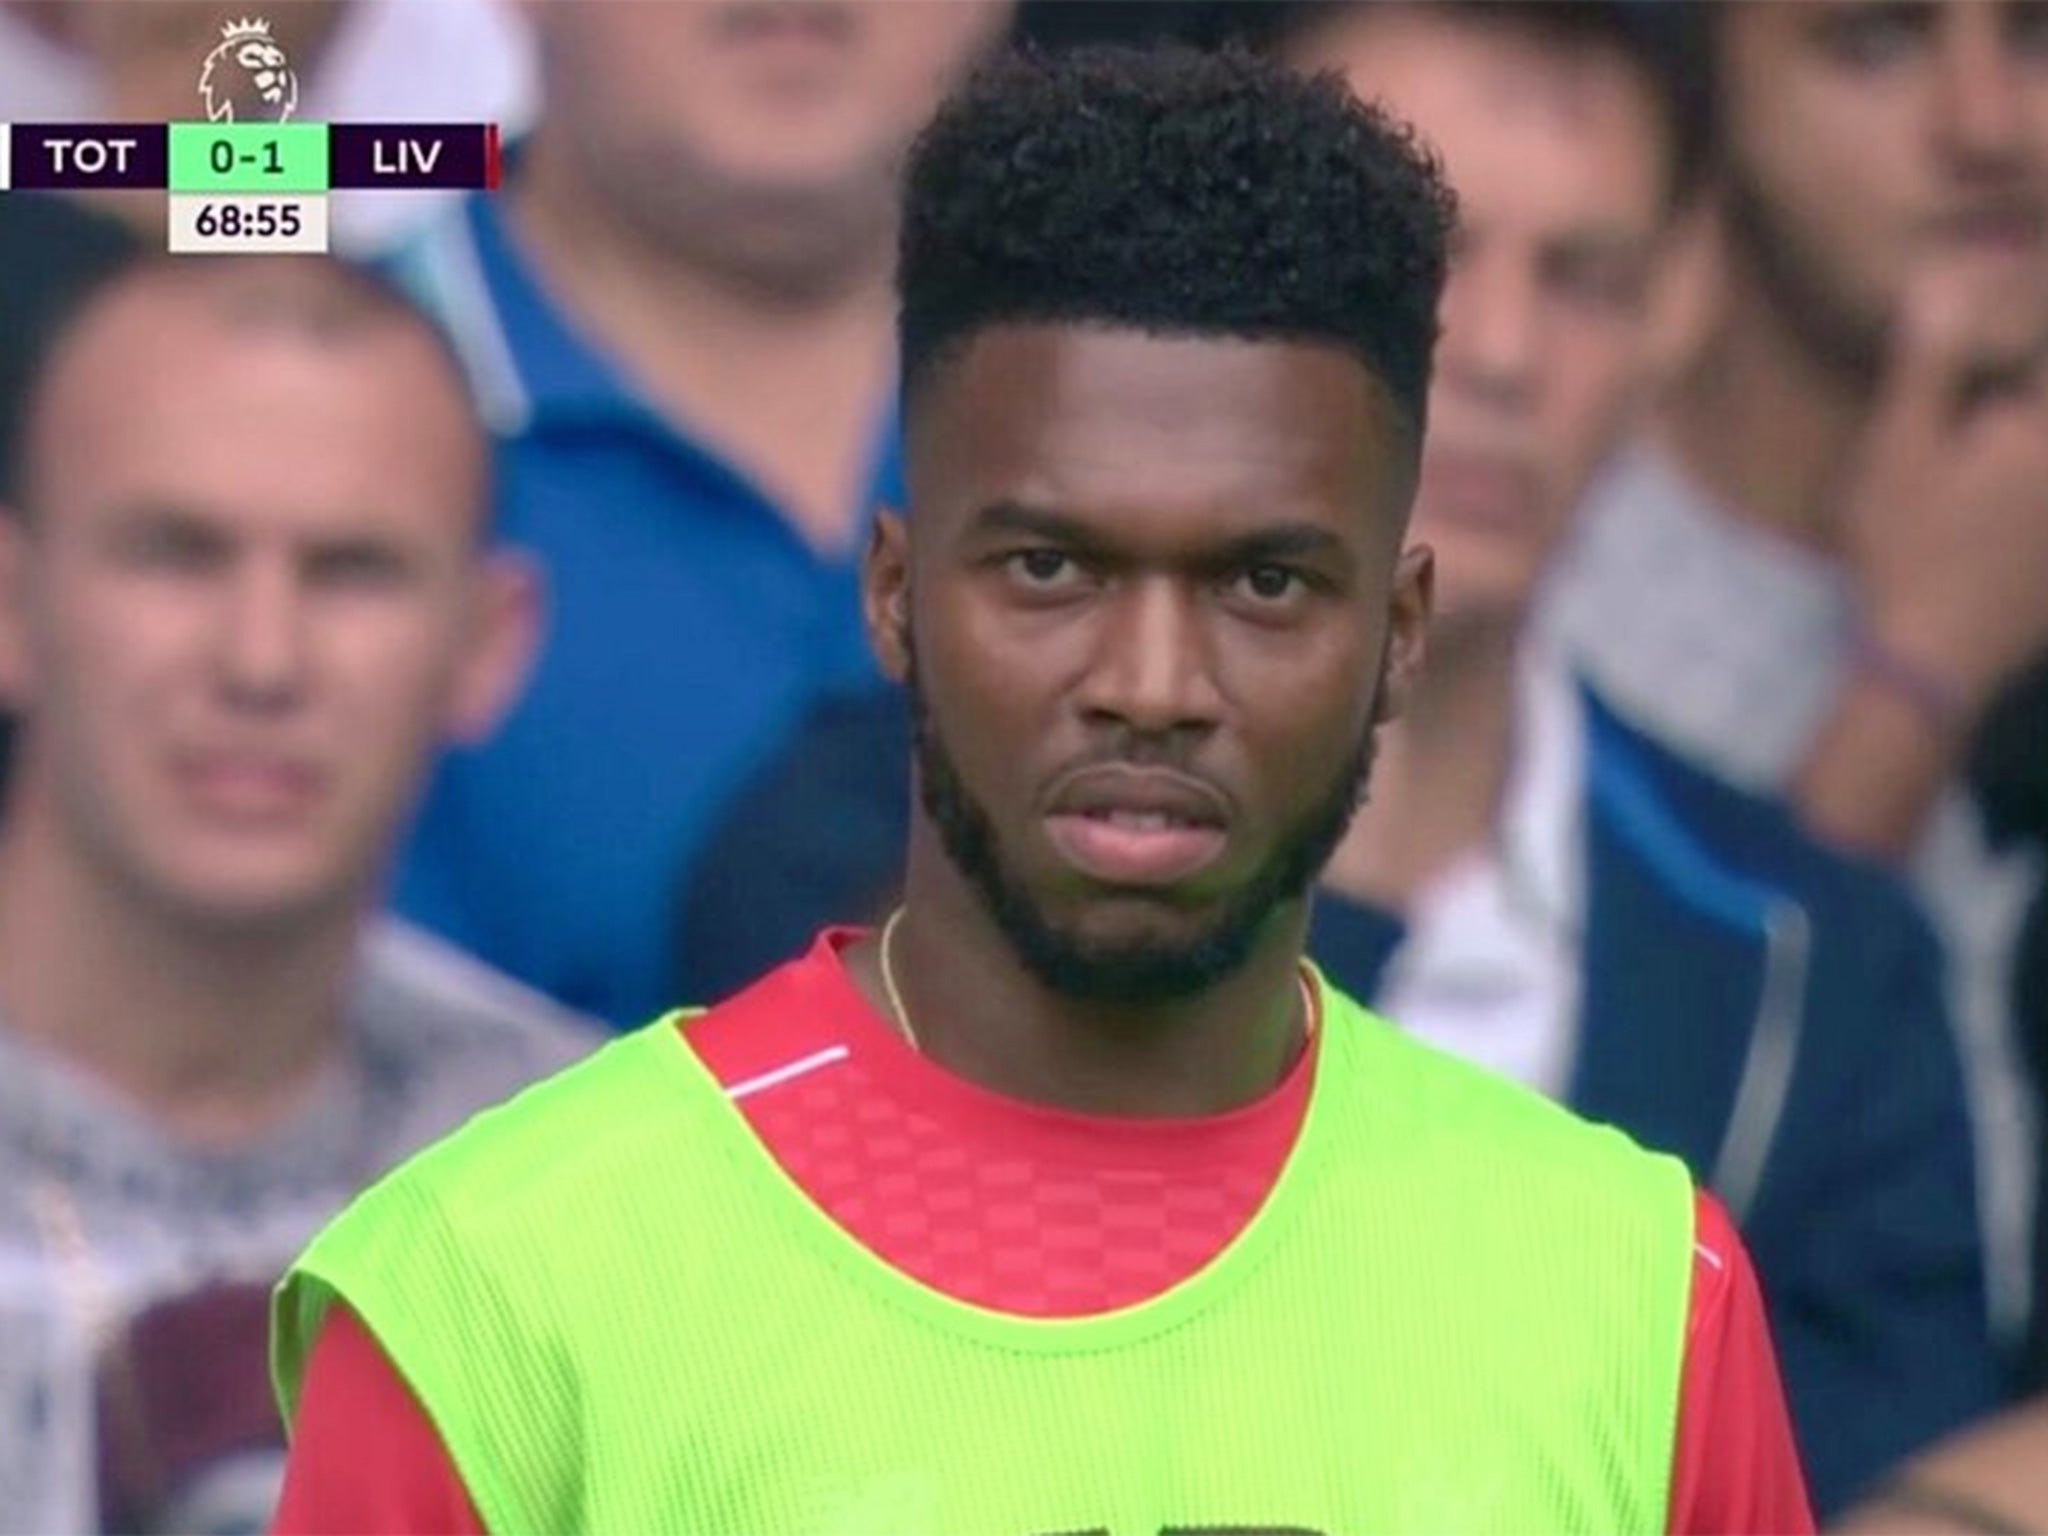 Sturridge gives a bemused look to the camera after Origi's substitution